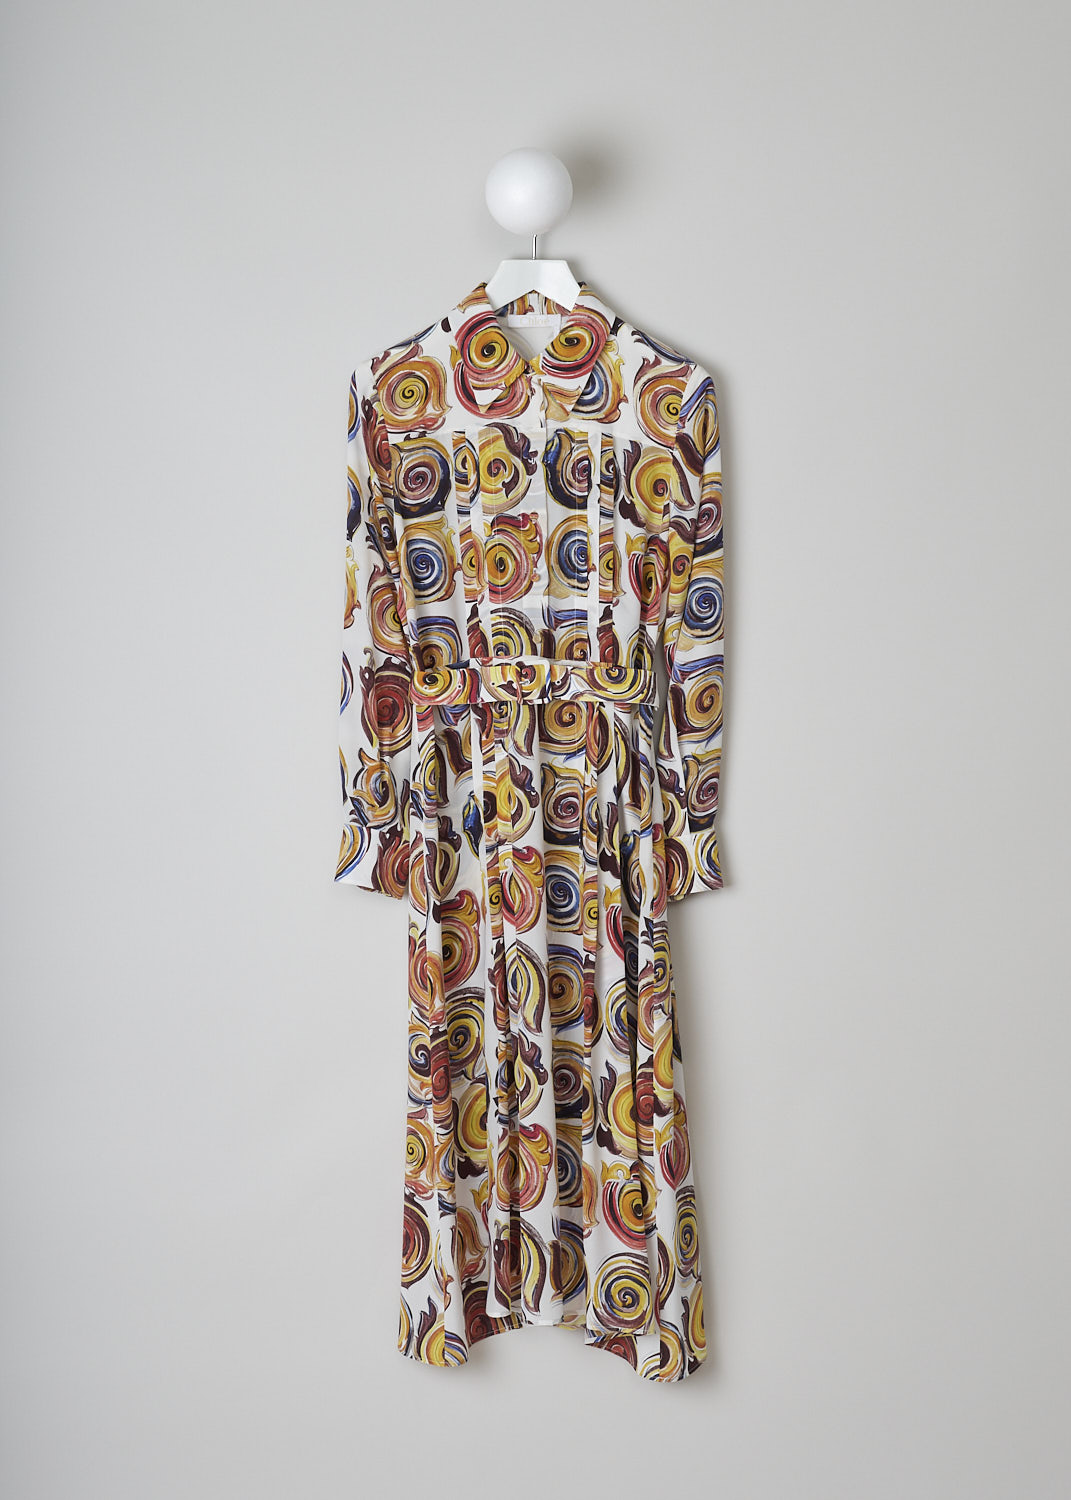 CHLOÃ‰, PRINTED SILK MAXI DRESS, CHC23ARO393039CA_MULTICOLOR_1, Print, White, Pink, Front, This maxi shirt dress has a white base color with an all-over swirl print in shades of yellow, blue, red and orange. The bodice has long sleeves with buttoned cuffs, a spread collar and a front button placket that goes to the waist. A matching fabric belt can be used to cinch in the waist. Knife pleats run along the length of the dress and stop midway on the skirt. A concealed side zip functions as the closure option. 

